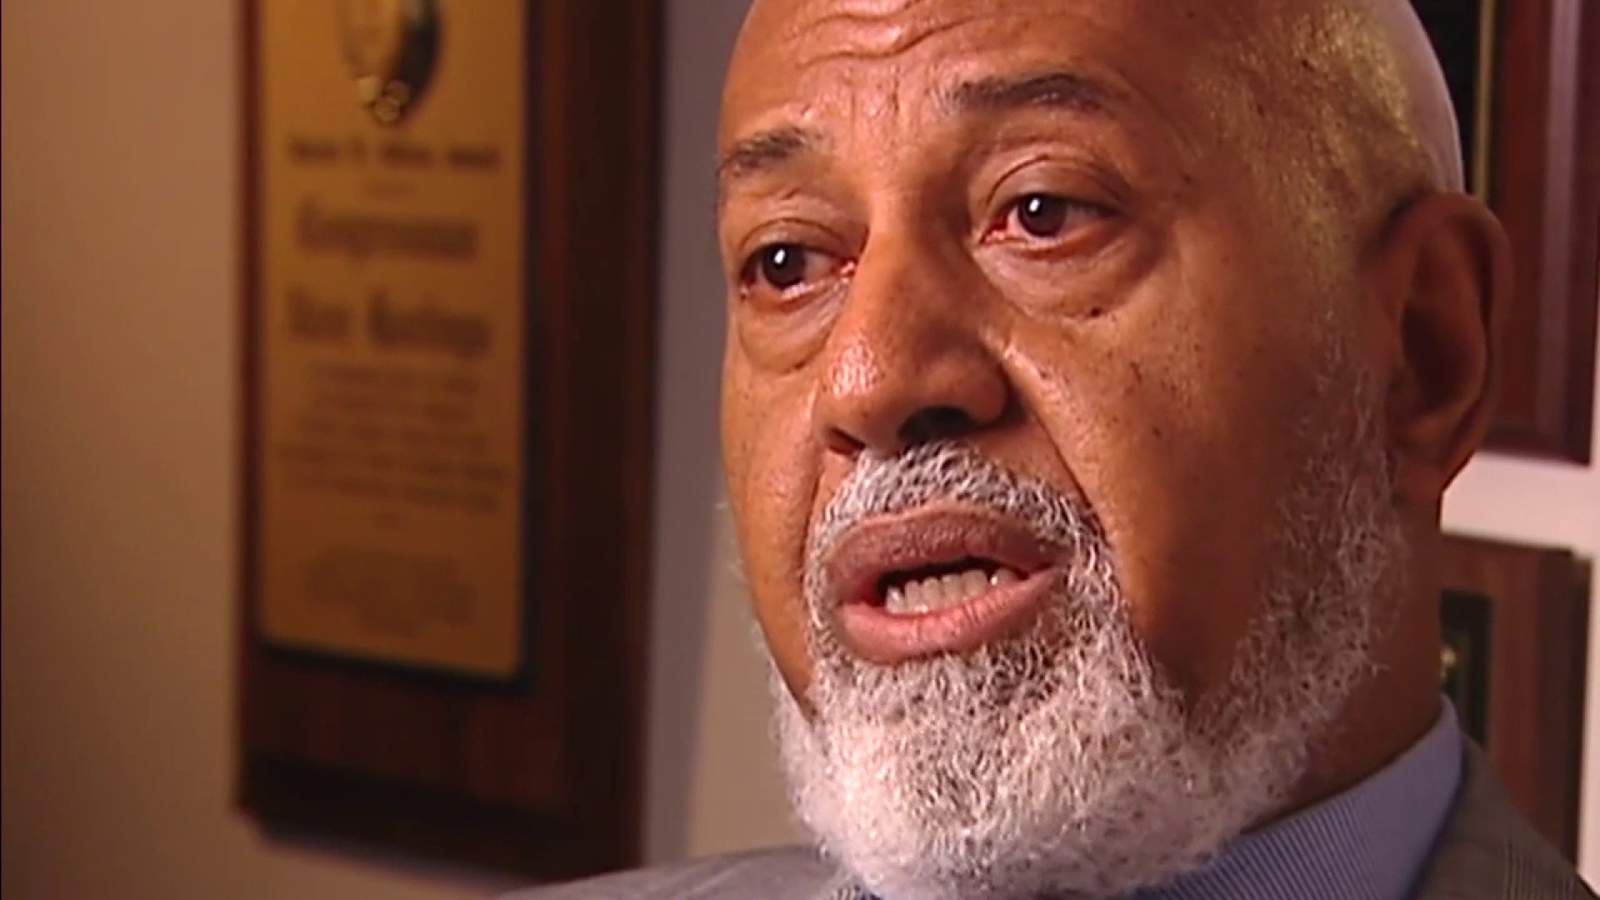 Alcee Hastings remembered for standing up to injustice, fighting for his community